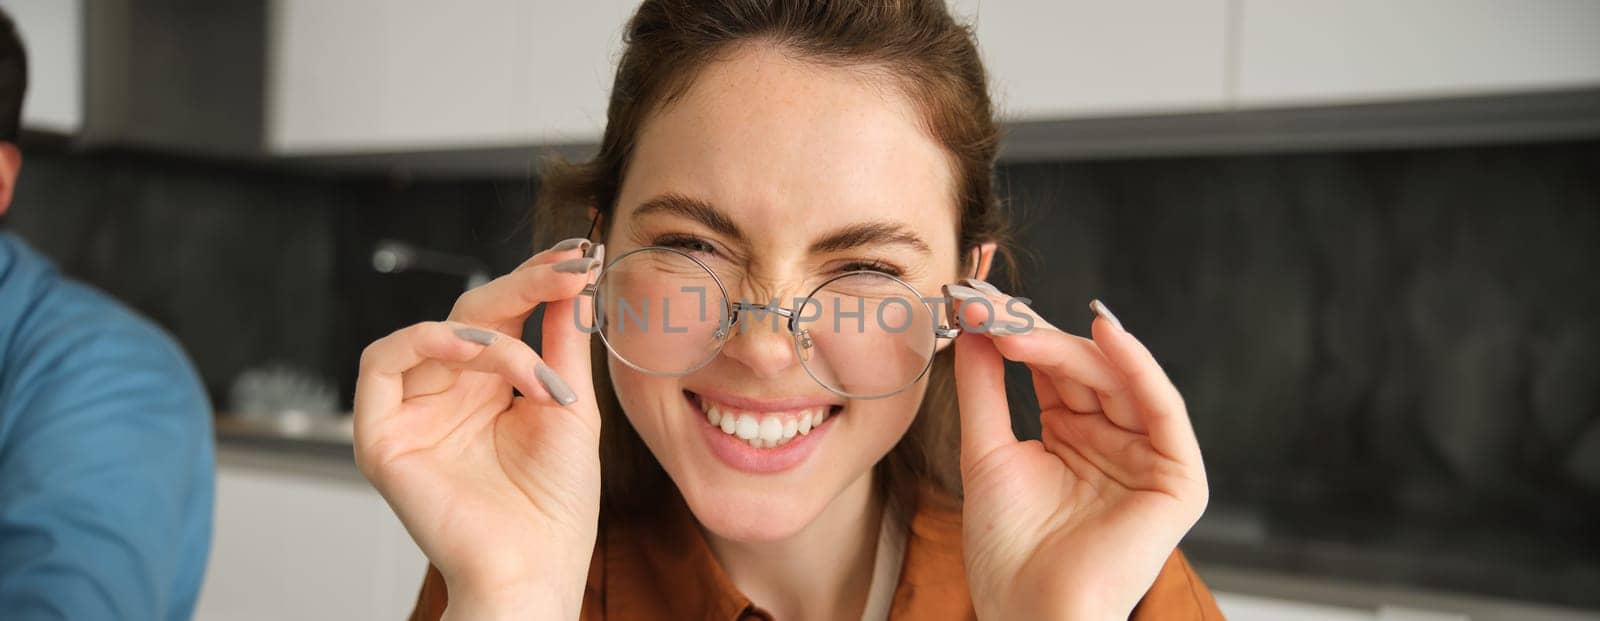 Close up portrait of attractive smiling woman with glasses, laughing and looking happy at camera.